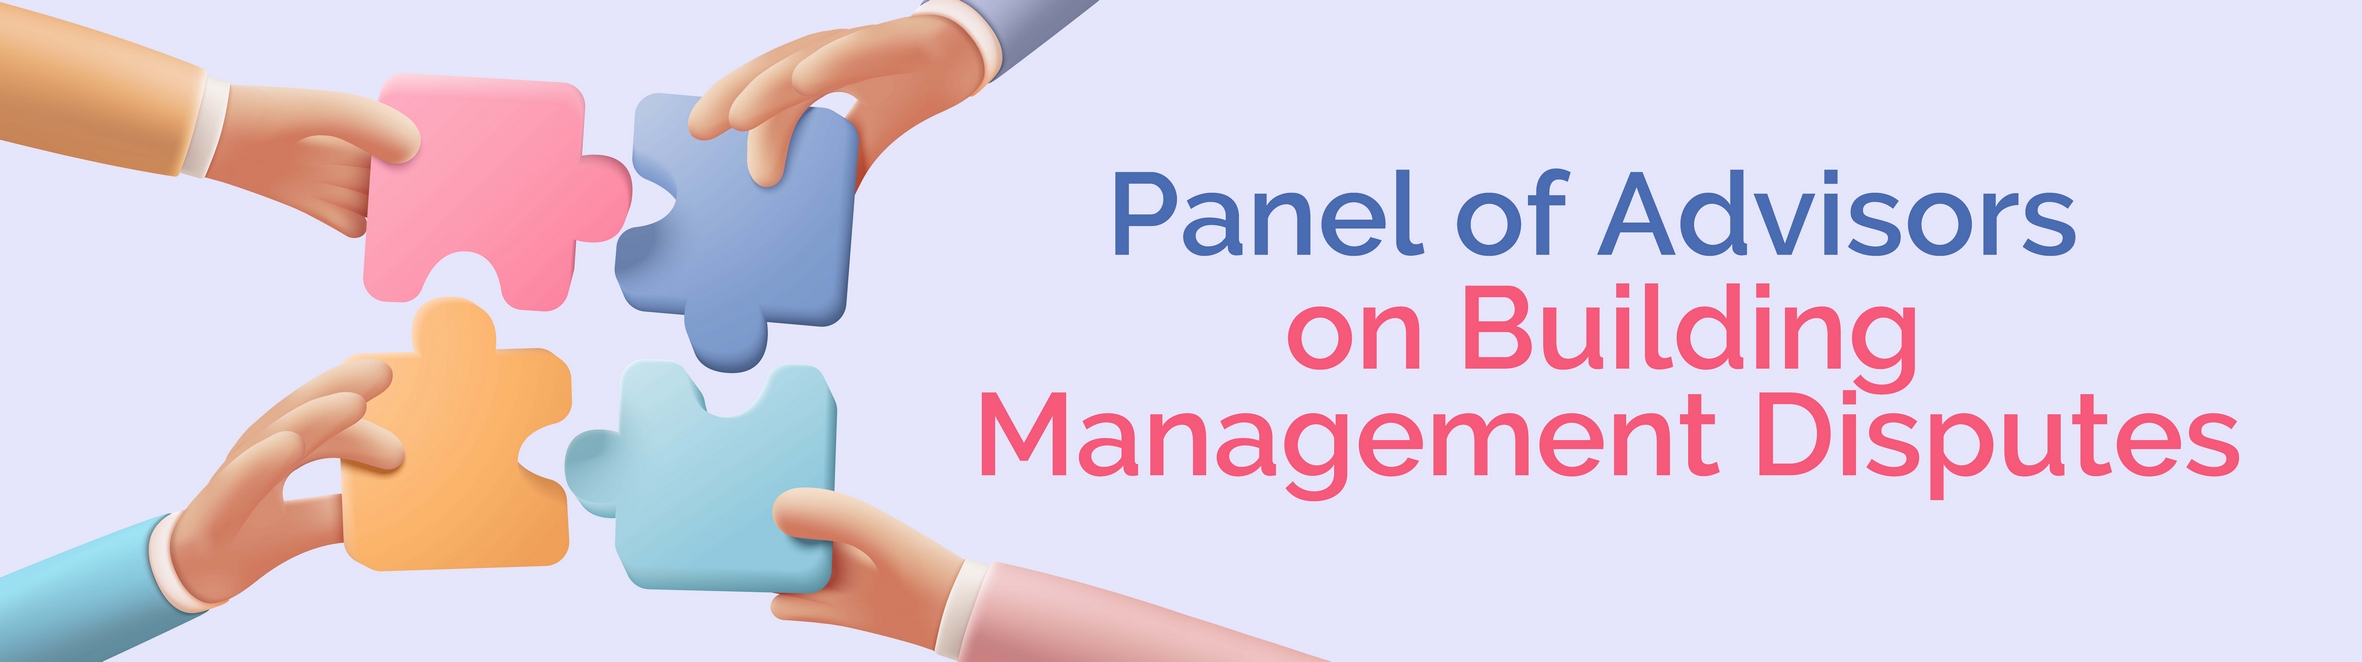 Panel of Advisors on Building Management Disputes